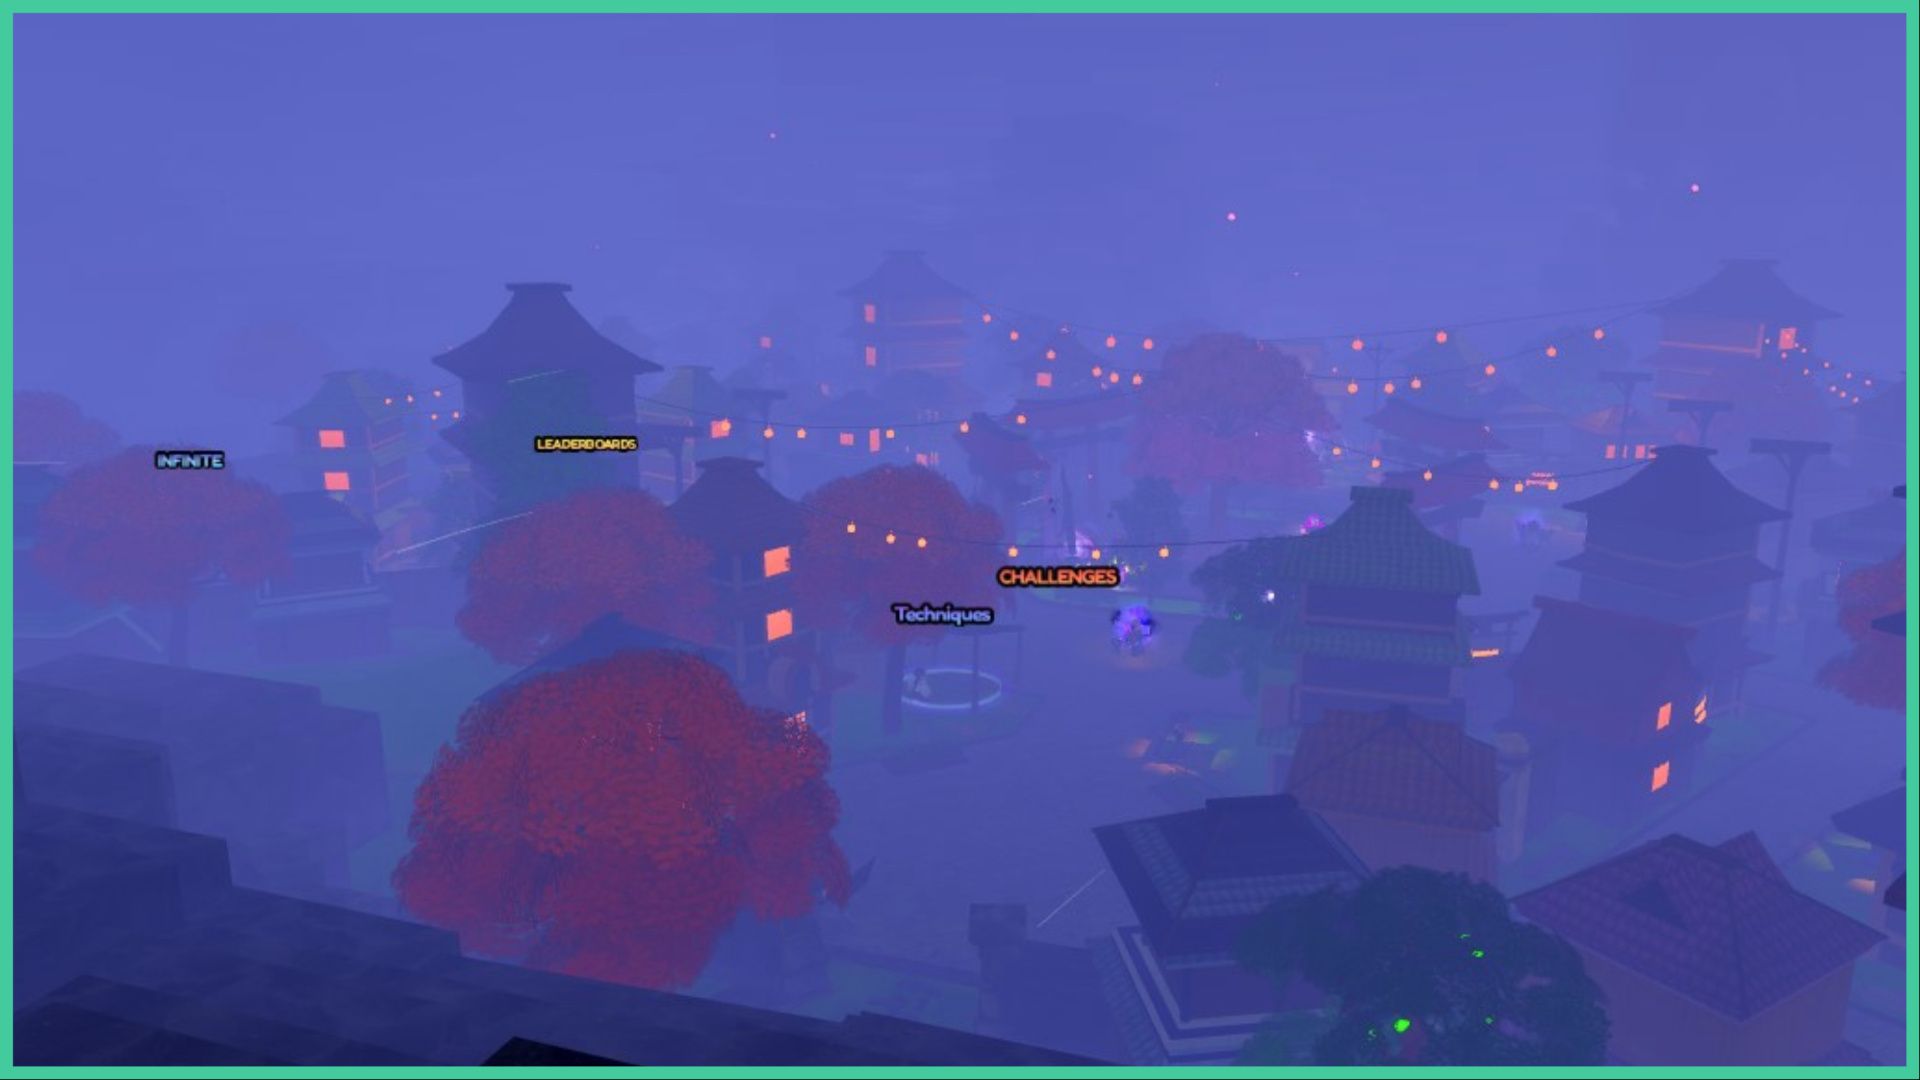 feature image for our anime last stand lightning queen guide, the image features a screenshot of the view from up a hill of the entire lobby area that's coated in mist with lanterns connect to the buildings to light up the space, some of the traditional style buildings have their amber hue lights on, and there are autumnal trees sprinkled around the area